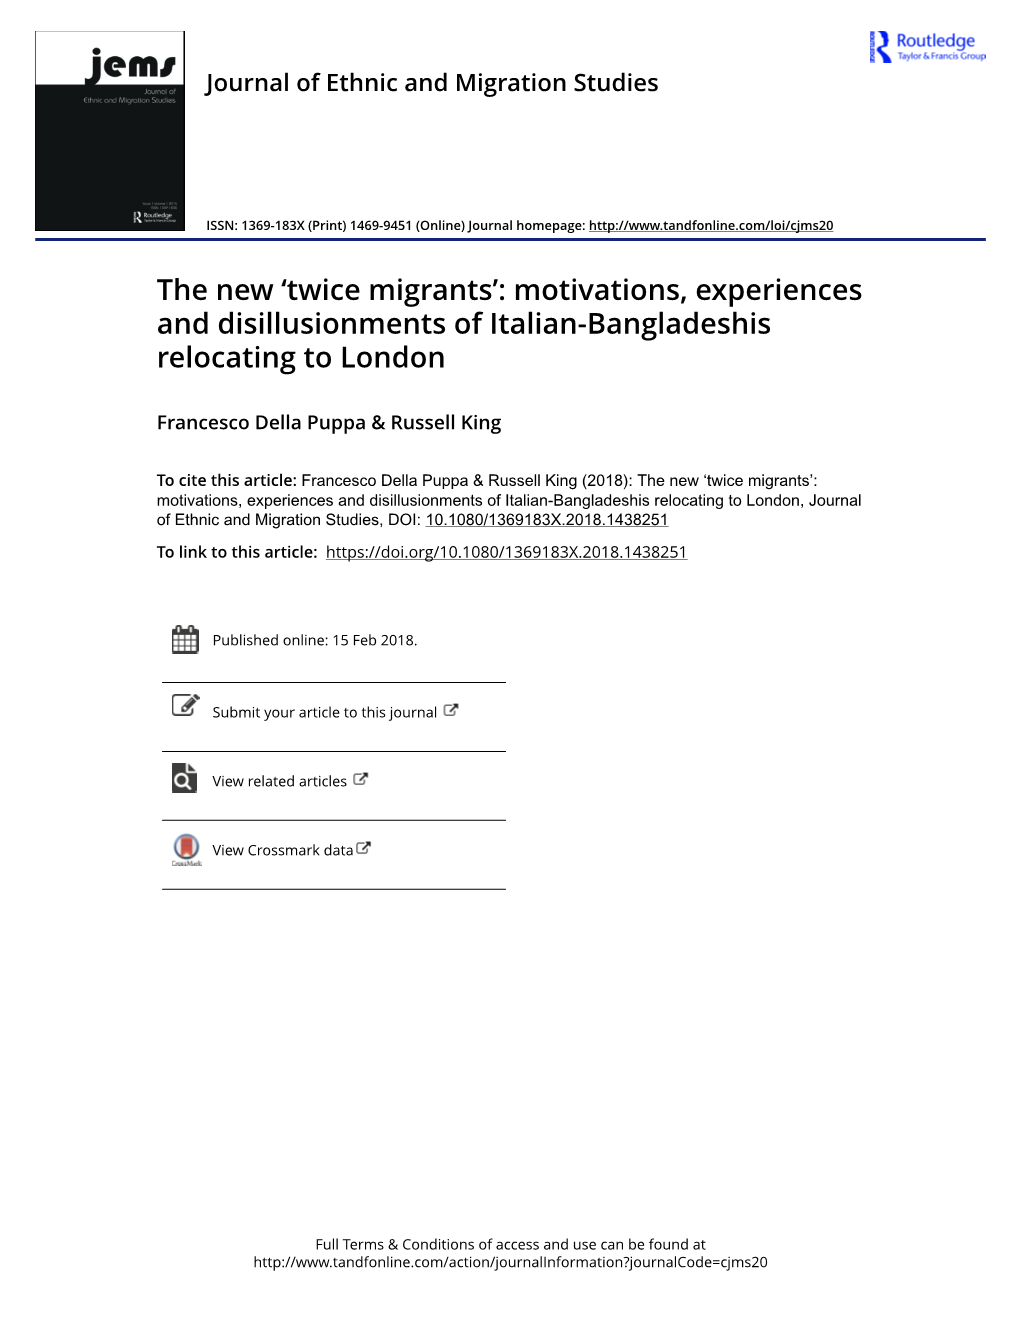 The New 'Twice Migrants': Motivations, Experiences and Disillusionments Of